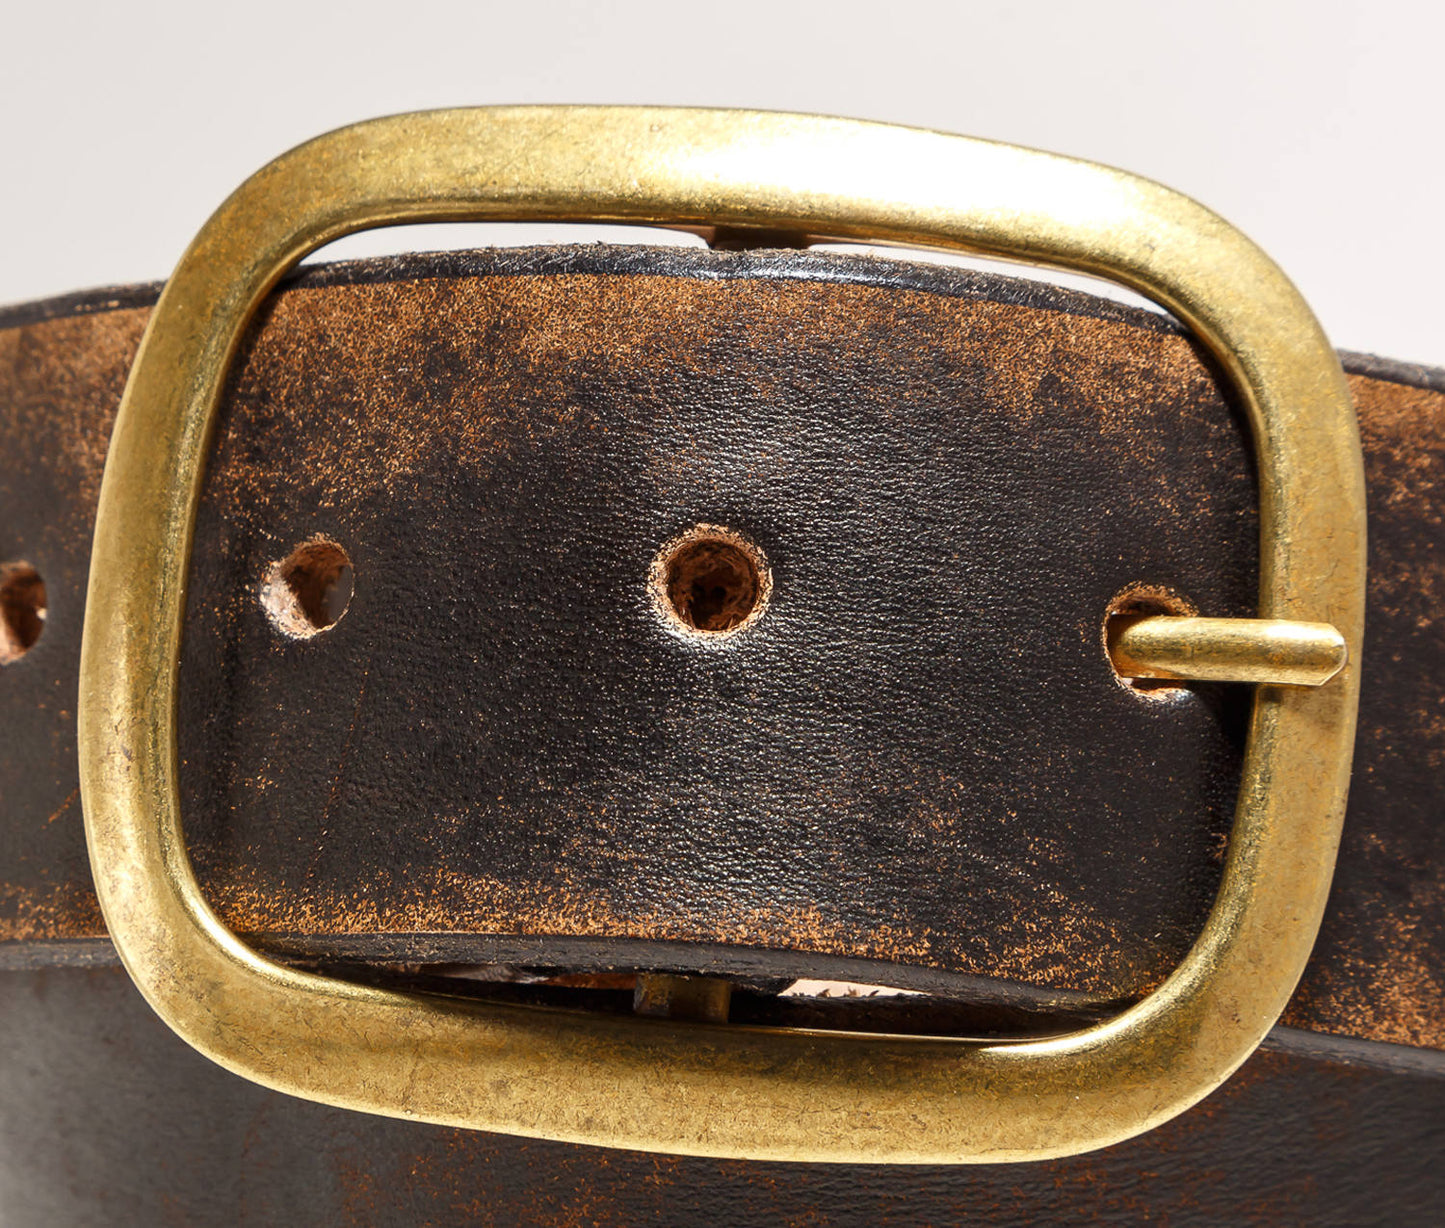 Nude Tan Leather Belt with Antique Silver or Brass Buckle